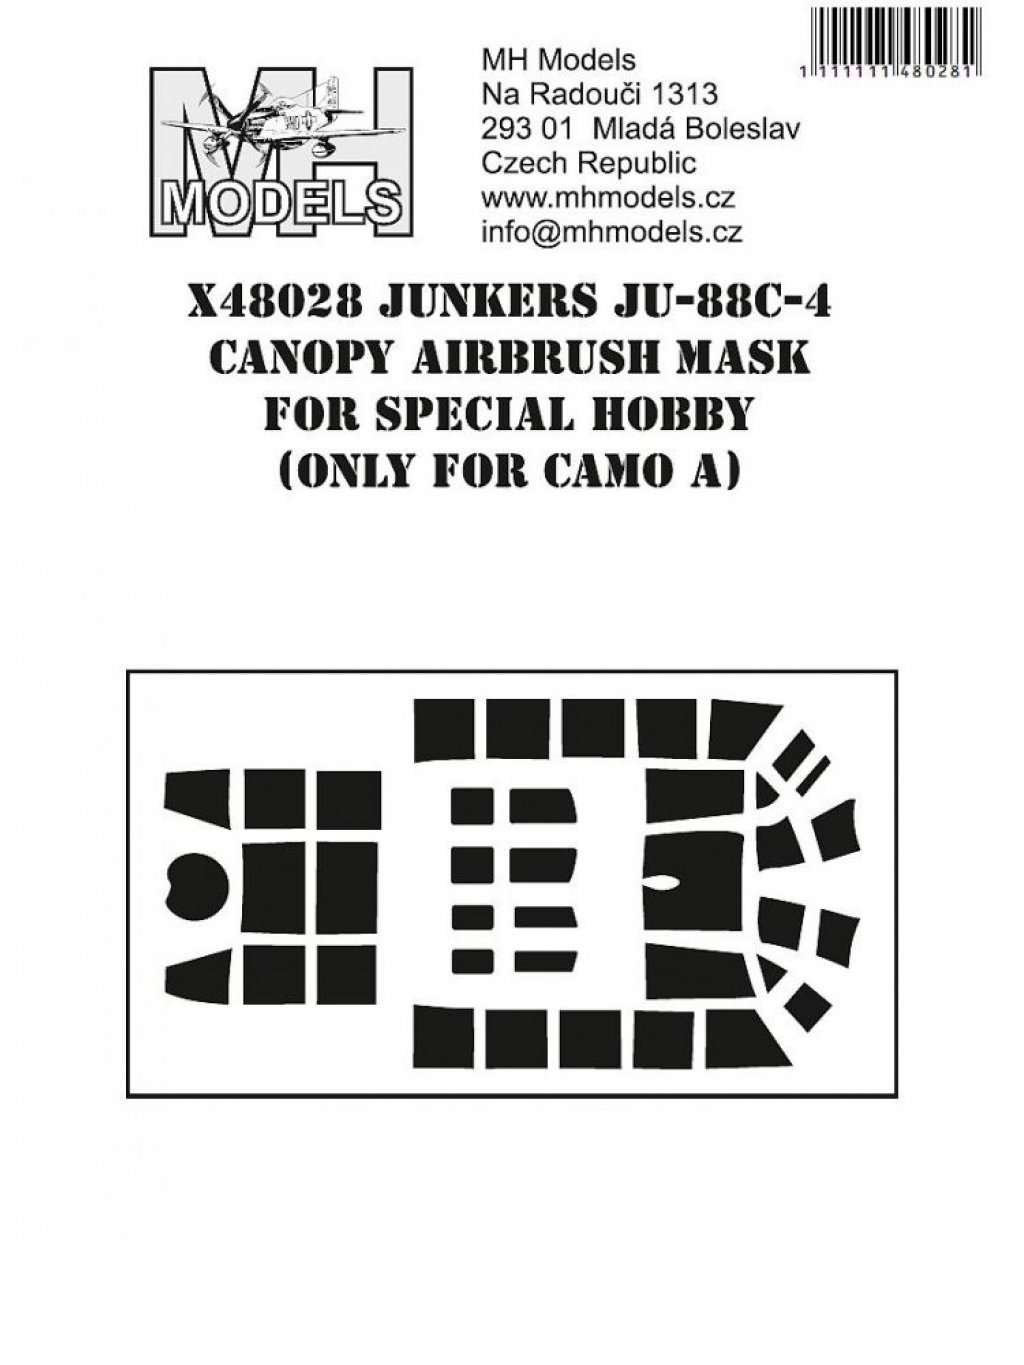 Junkers Ju-88C-4 Canopy airbrush mask for Special Hobby camo A only